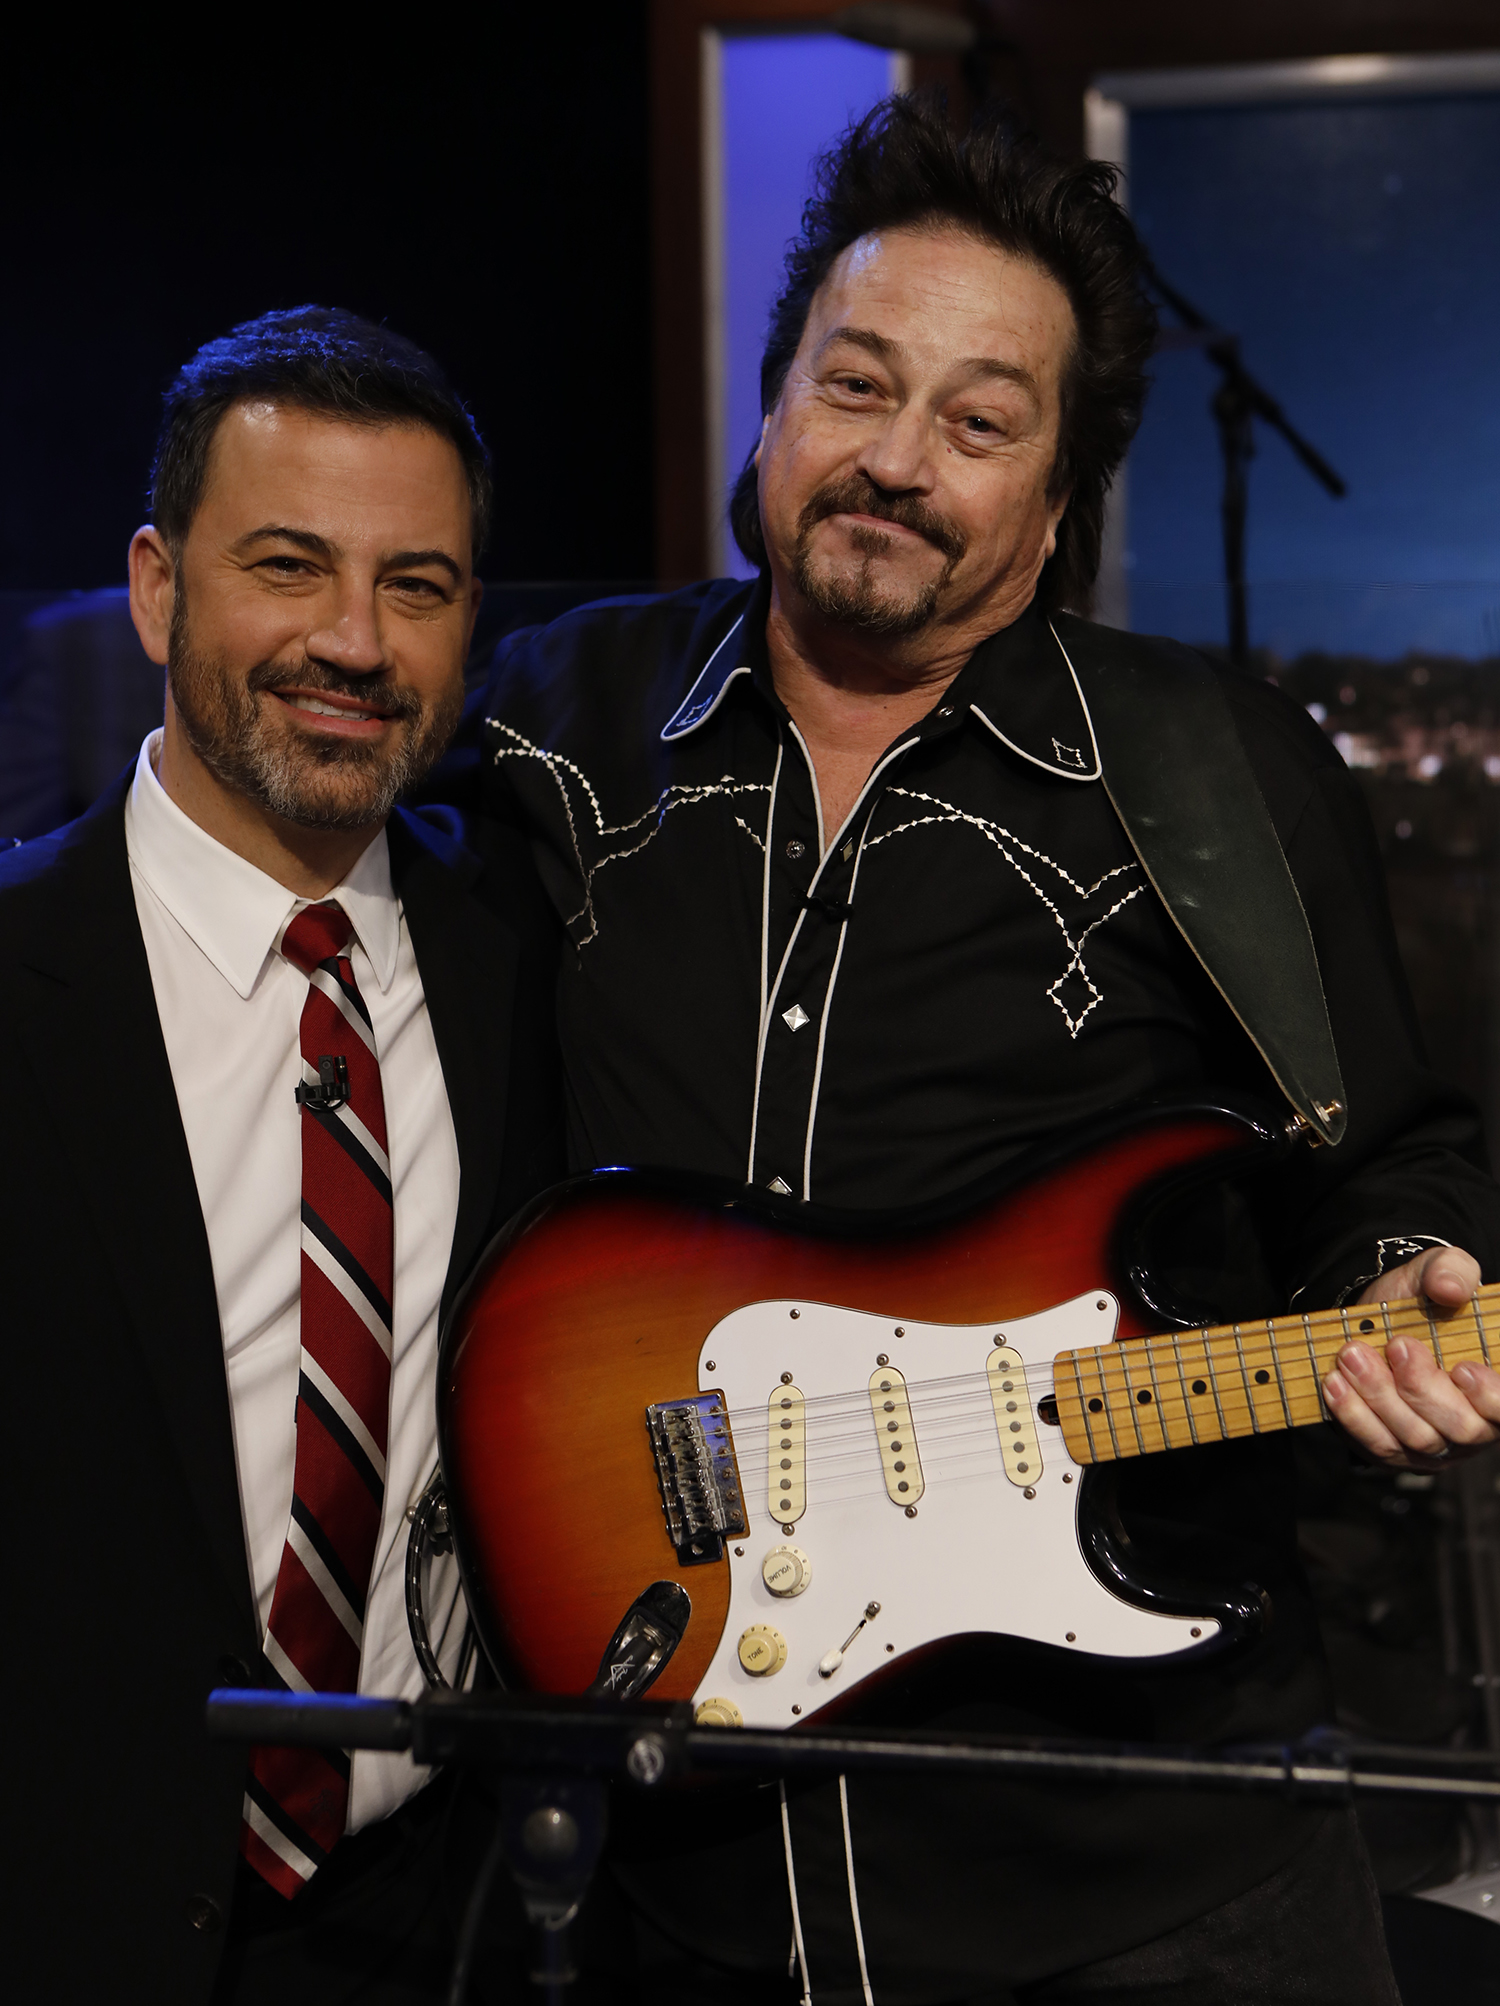 Tom MacLear and Jimmy Kimmel on Jimmy Kimmel Live